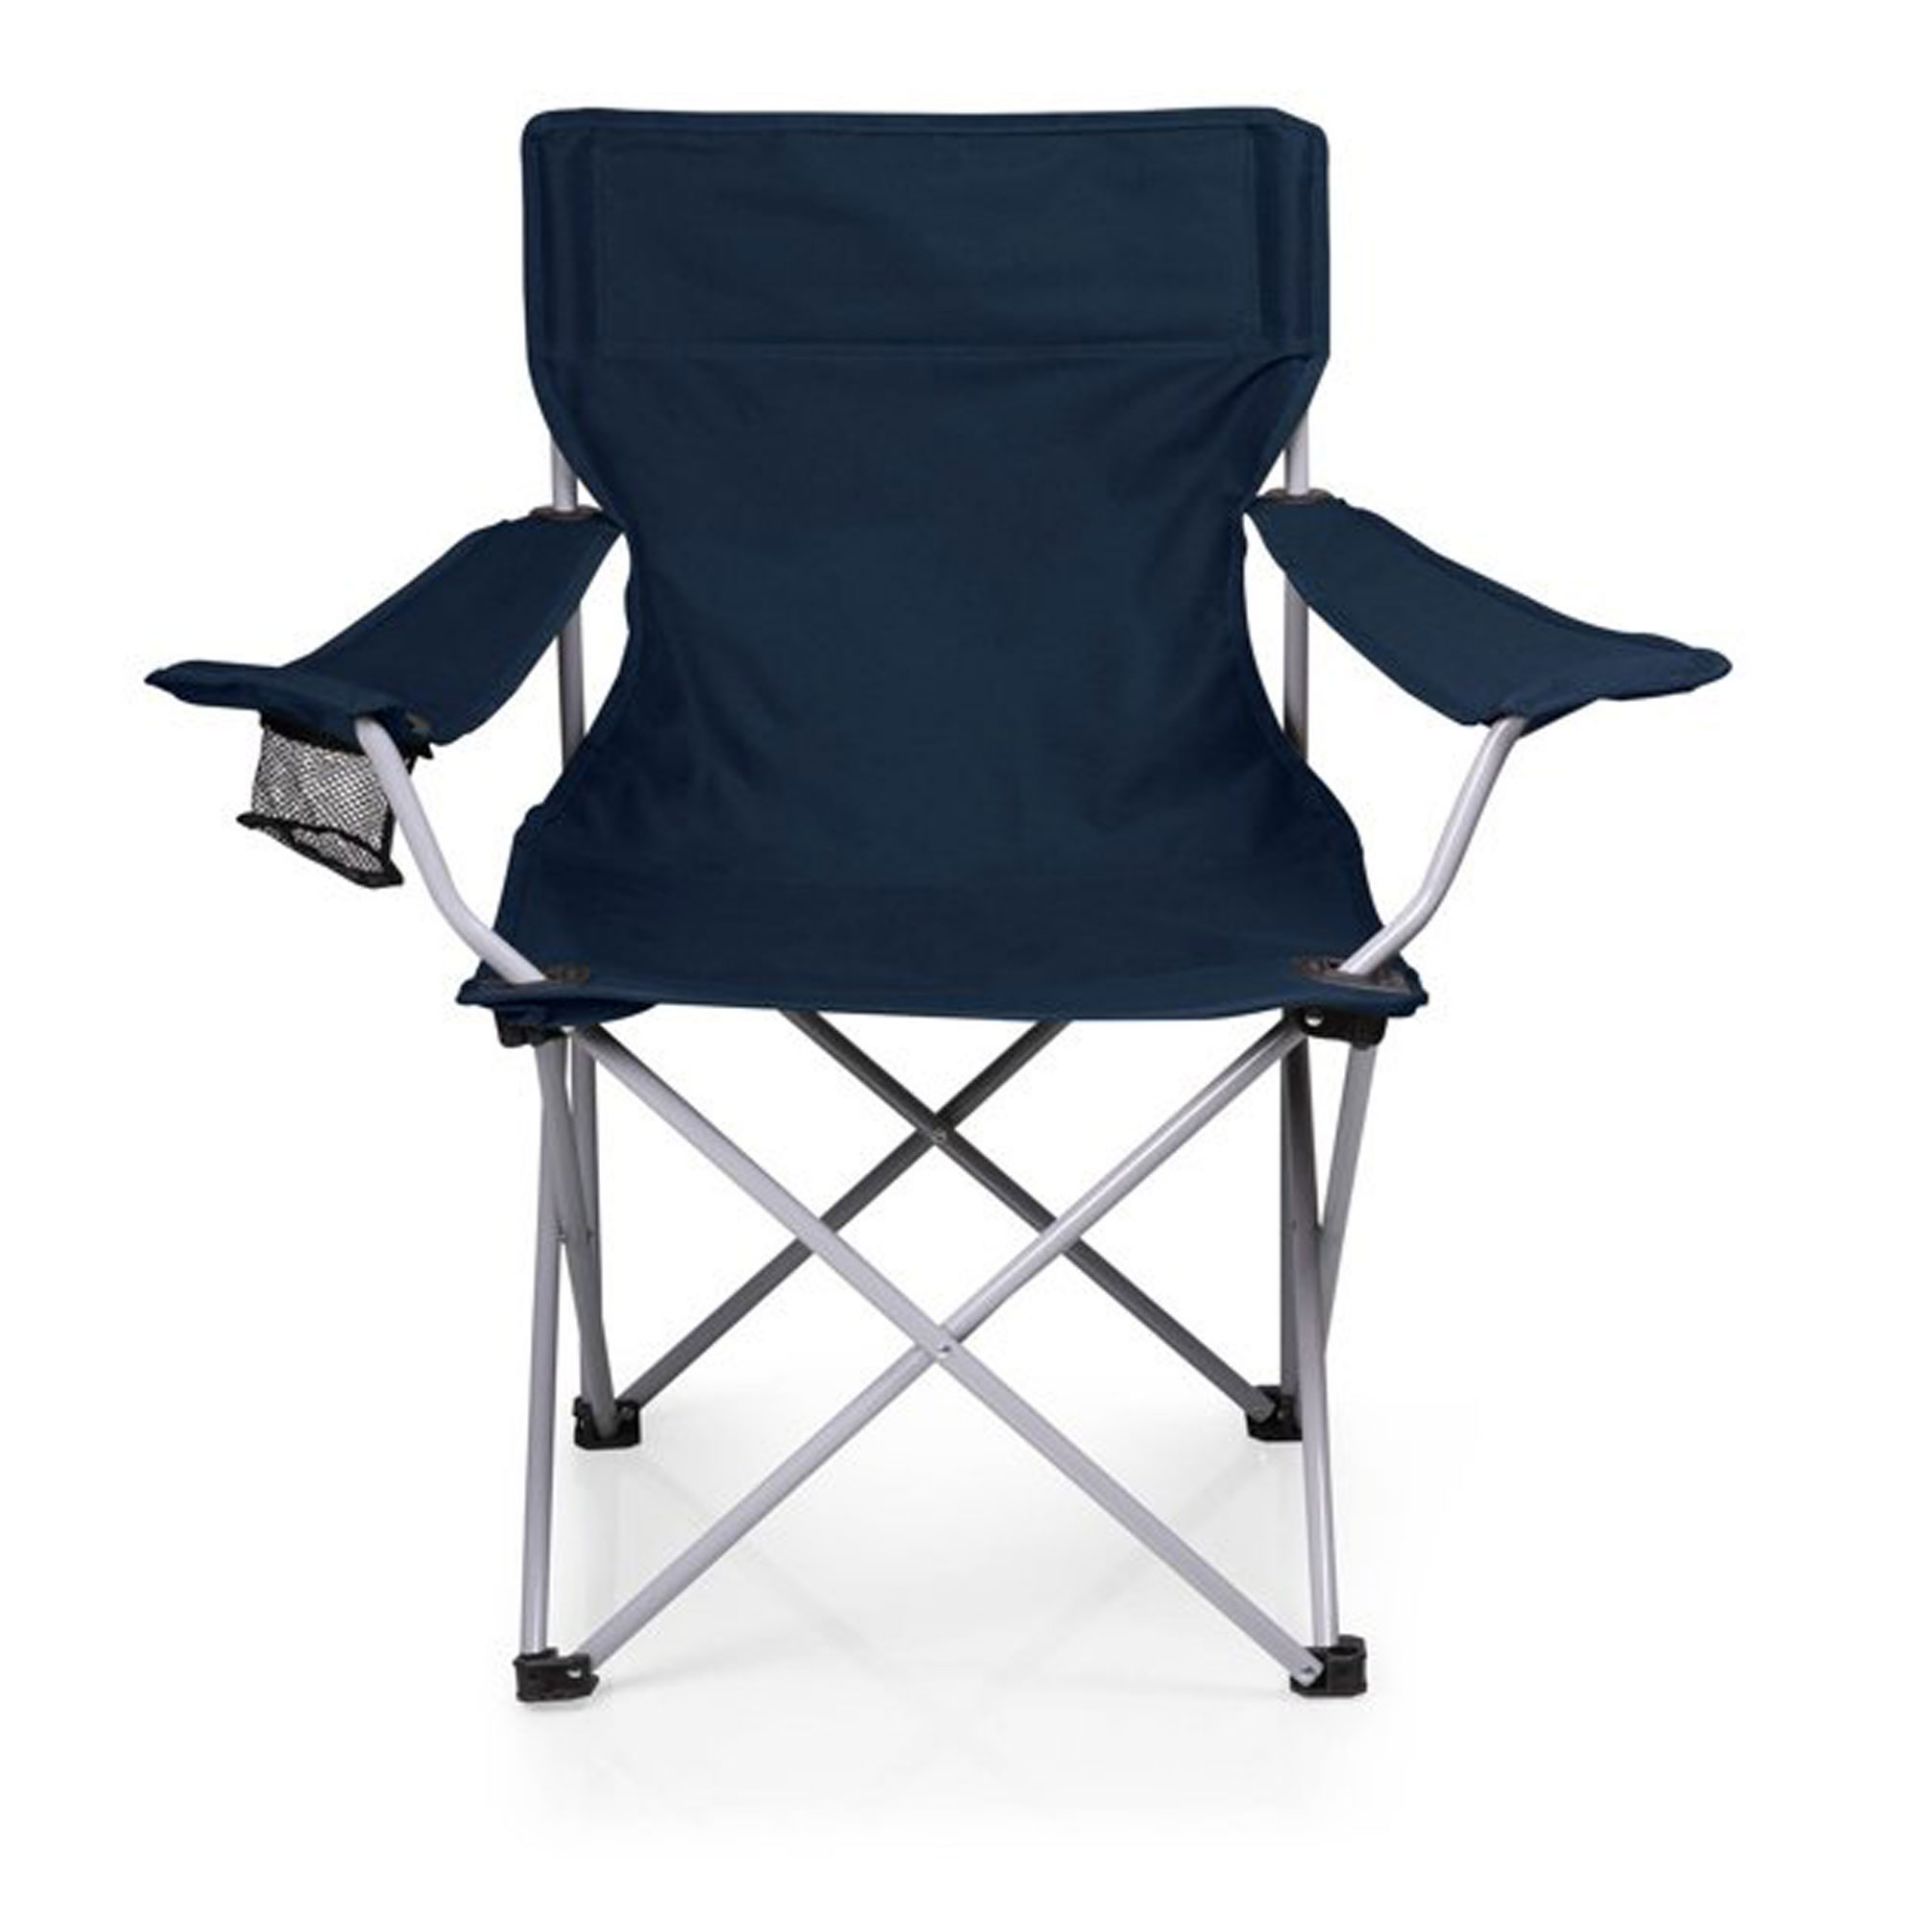 UNITS - RBSM CAMPING FOLDING CHAIRS W/ CARRYING BAGS - NAVY BLUE (NEW) (MSRP $75) - Bild 3 aus 4